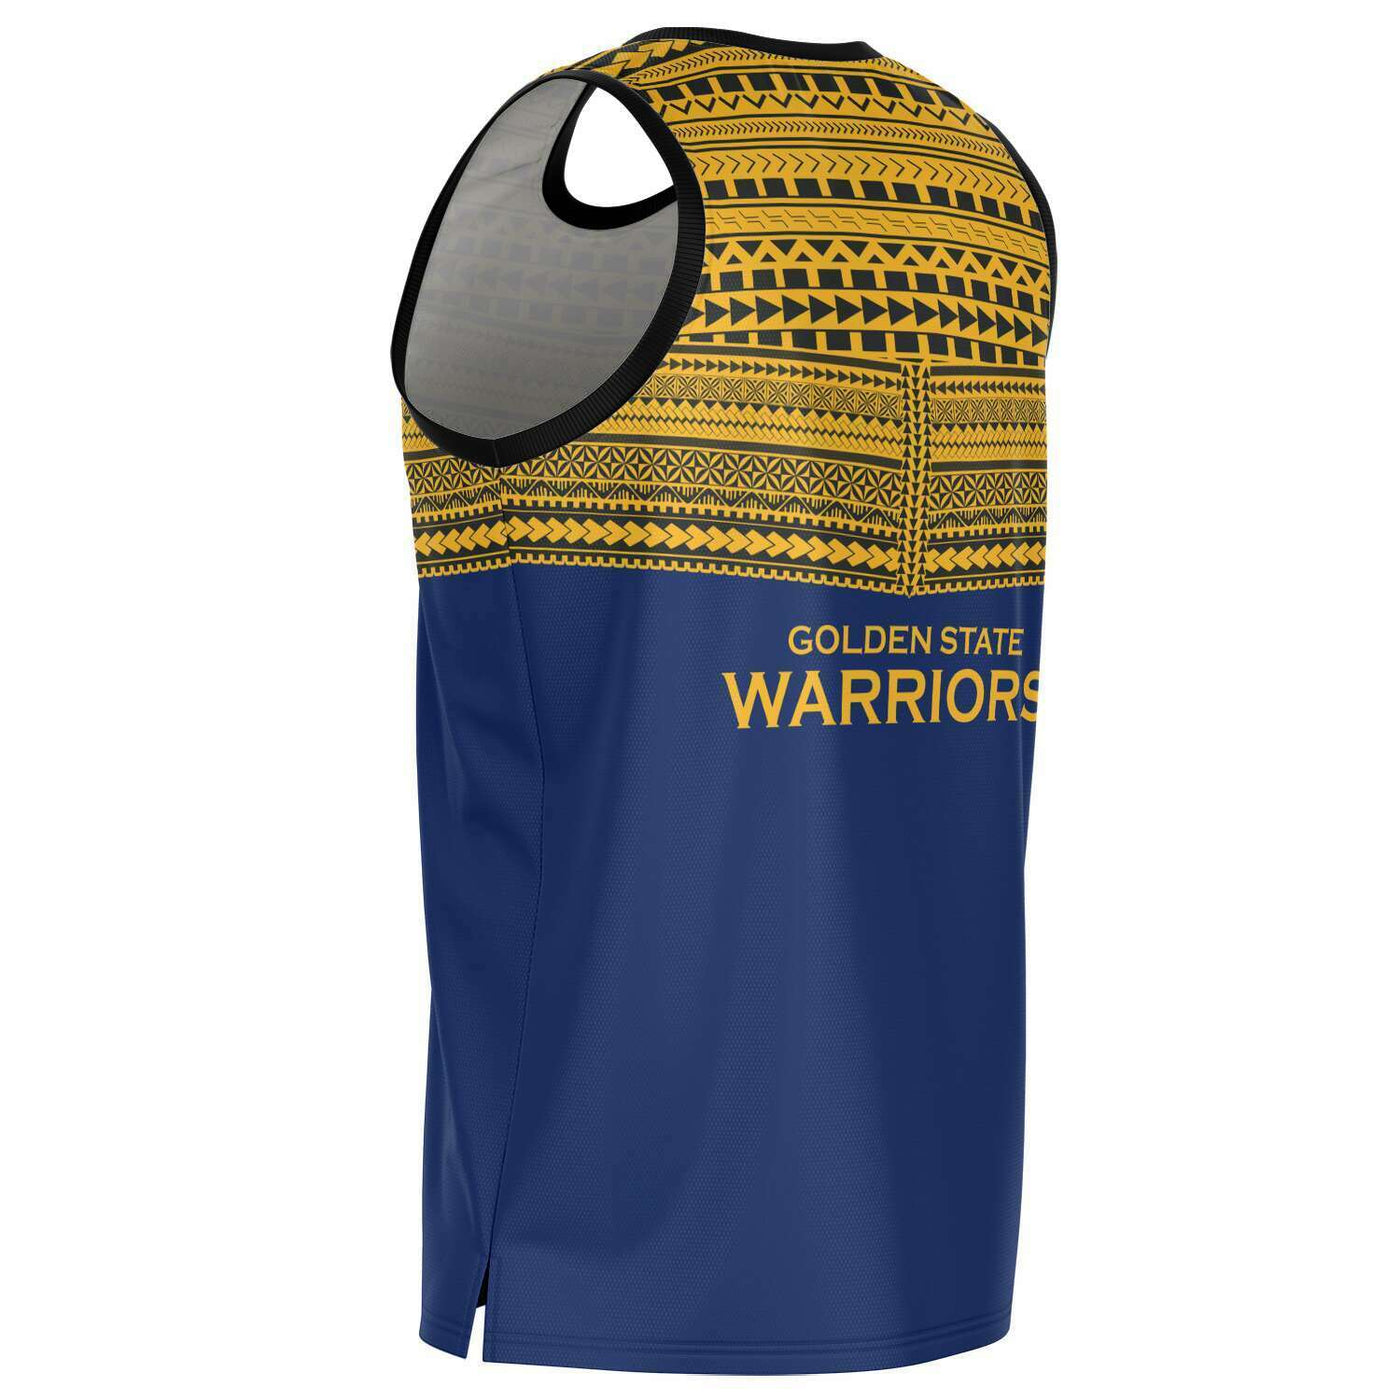 Sublimated Basketball Jersey Warriors style